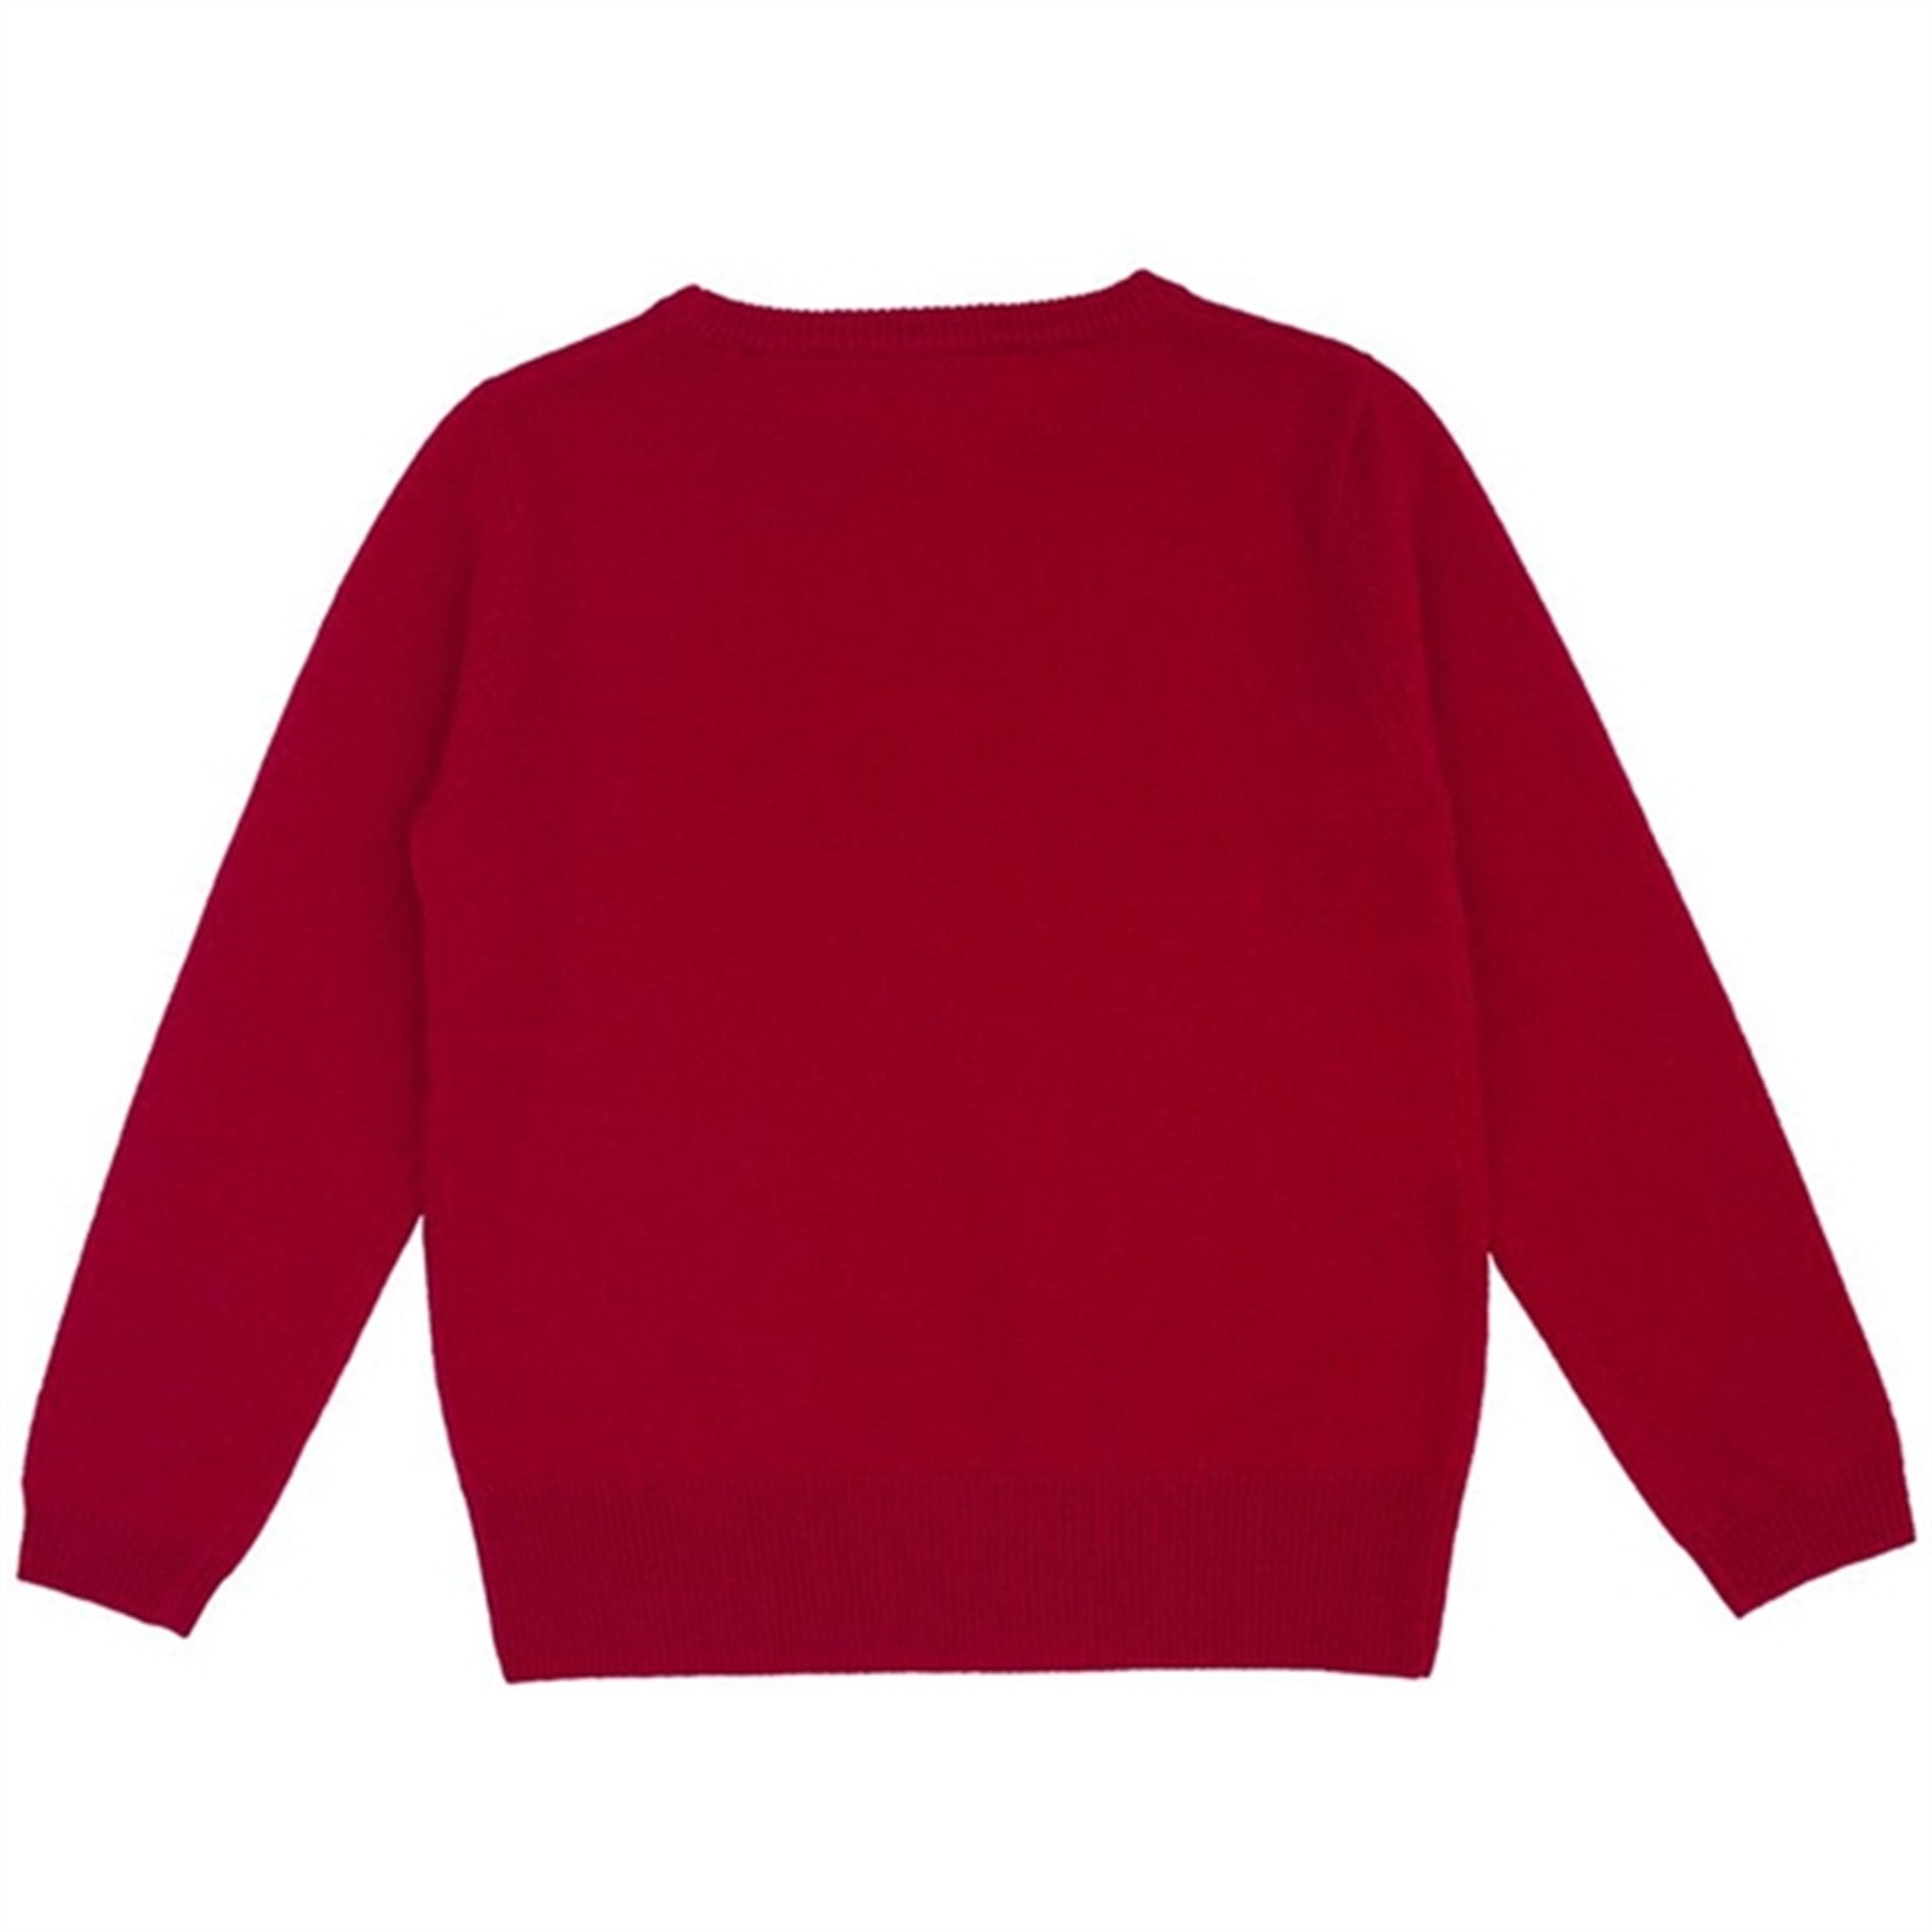 HOLMM Postbox Billy Cashmere Knit Sweater 2